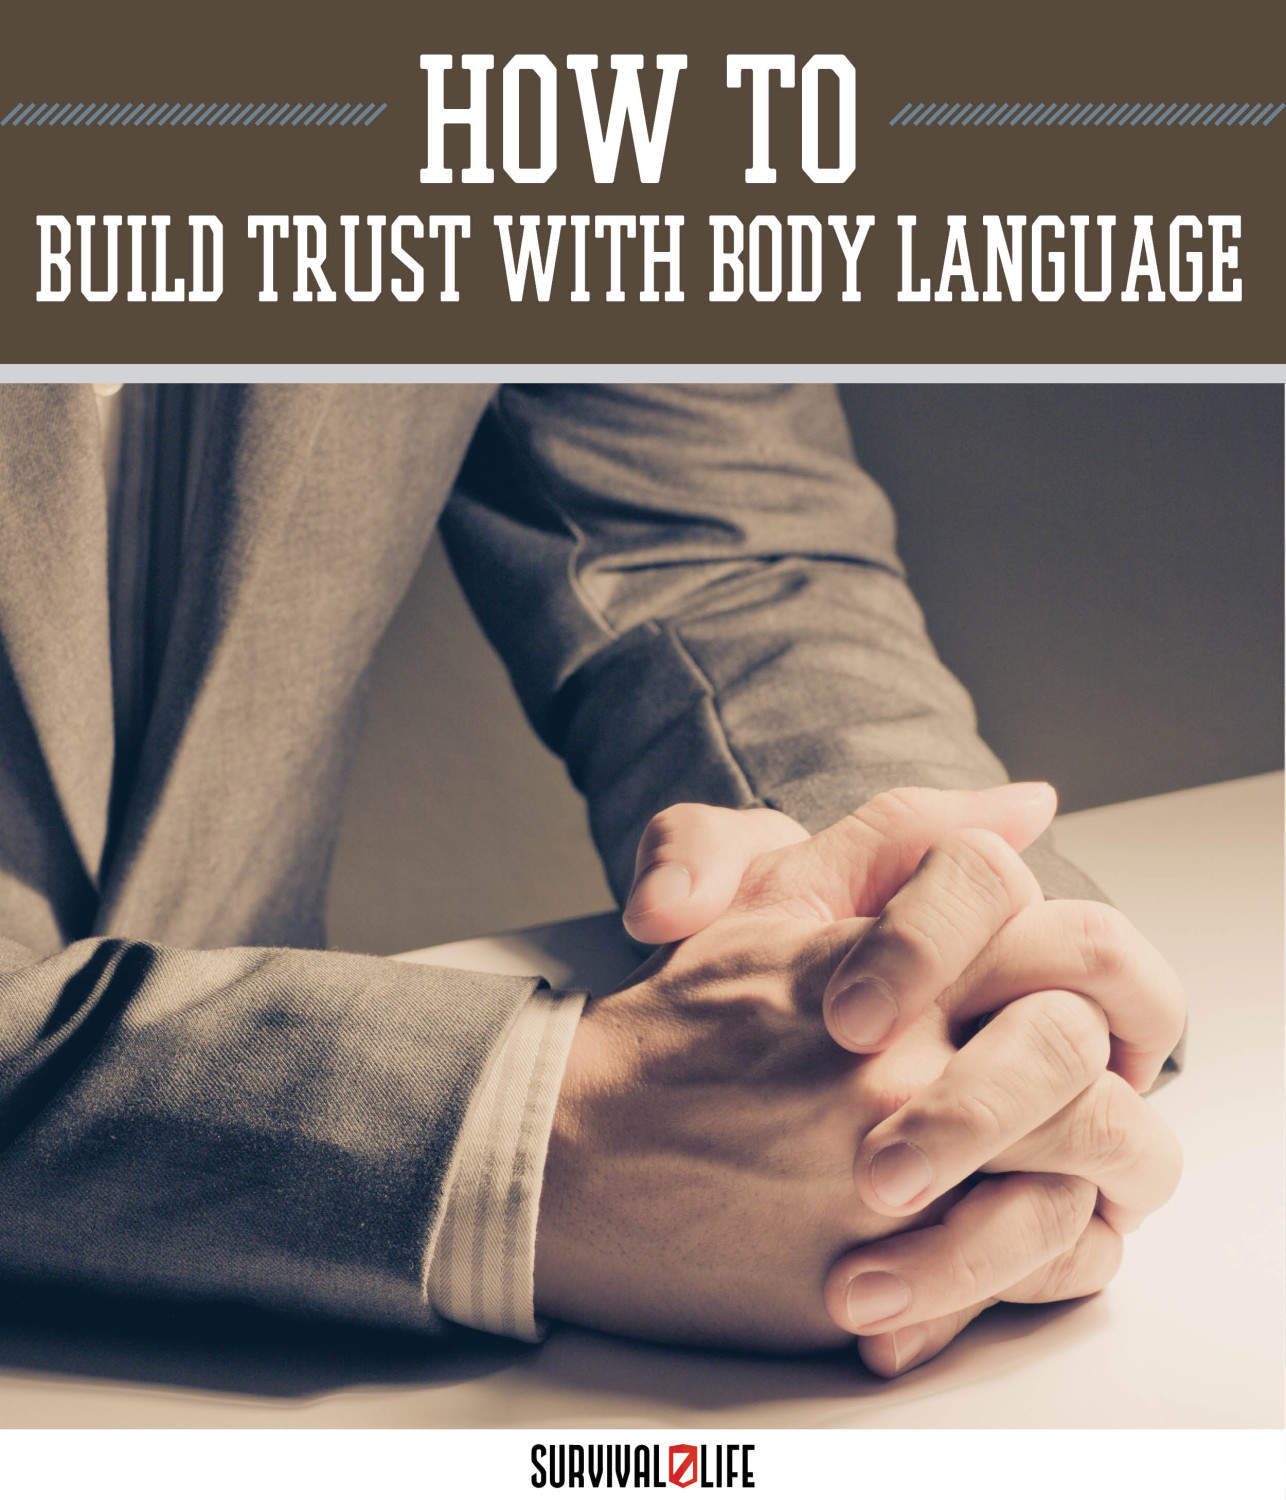 Building Trust with Body Language by Survival Life at http://survivallife.com/2015/04/28/building-trust-with-body-language